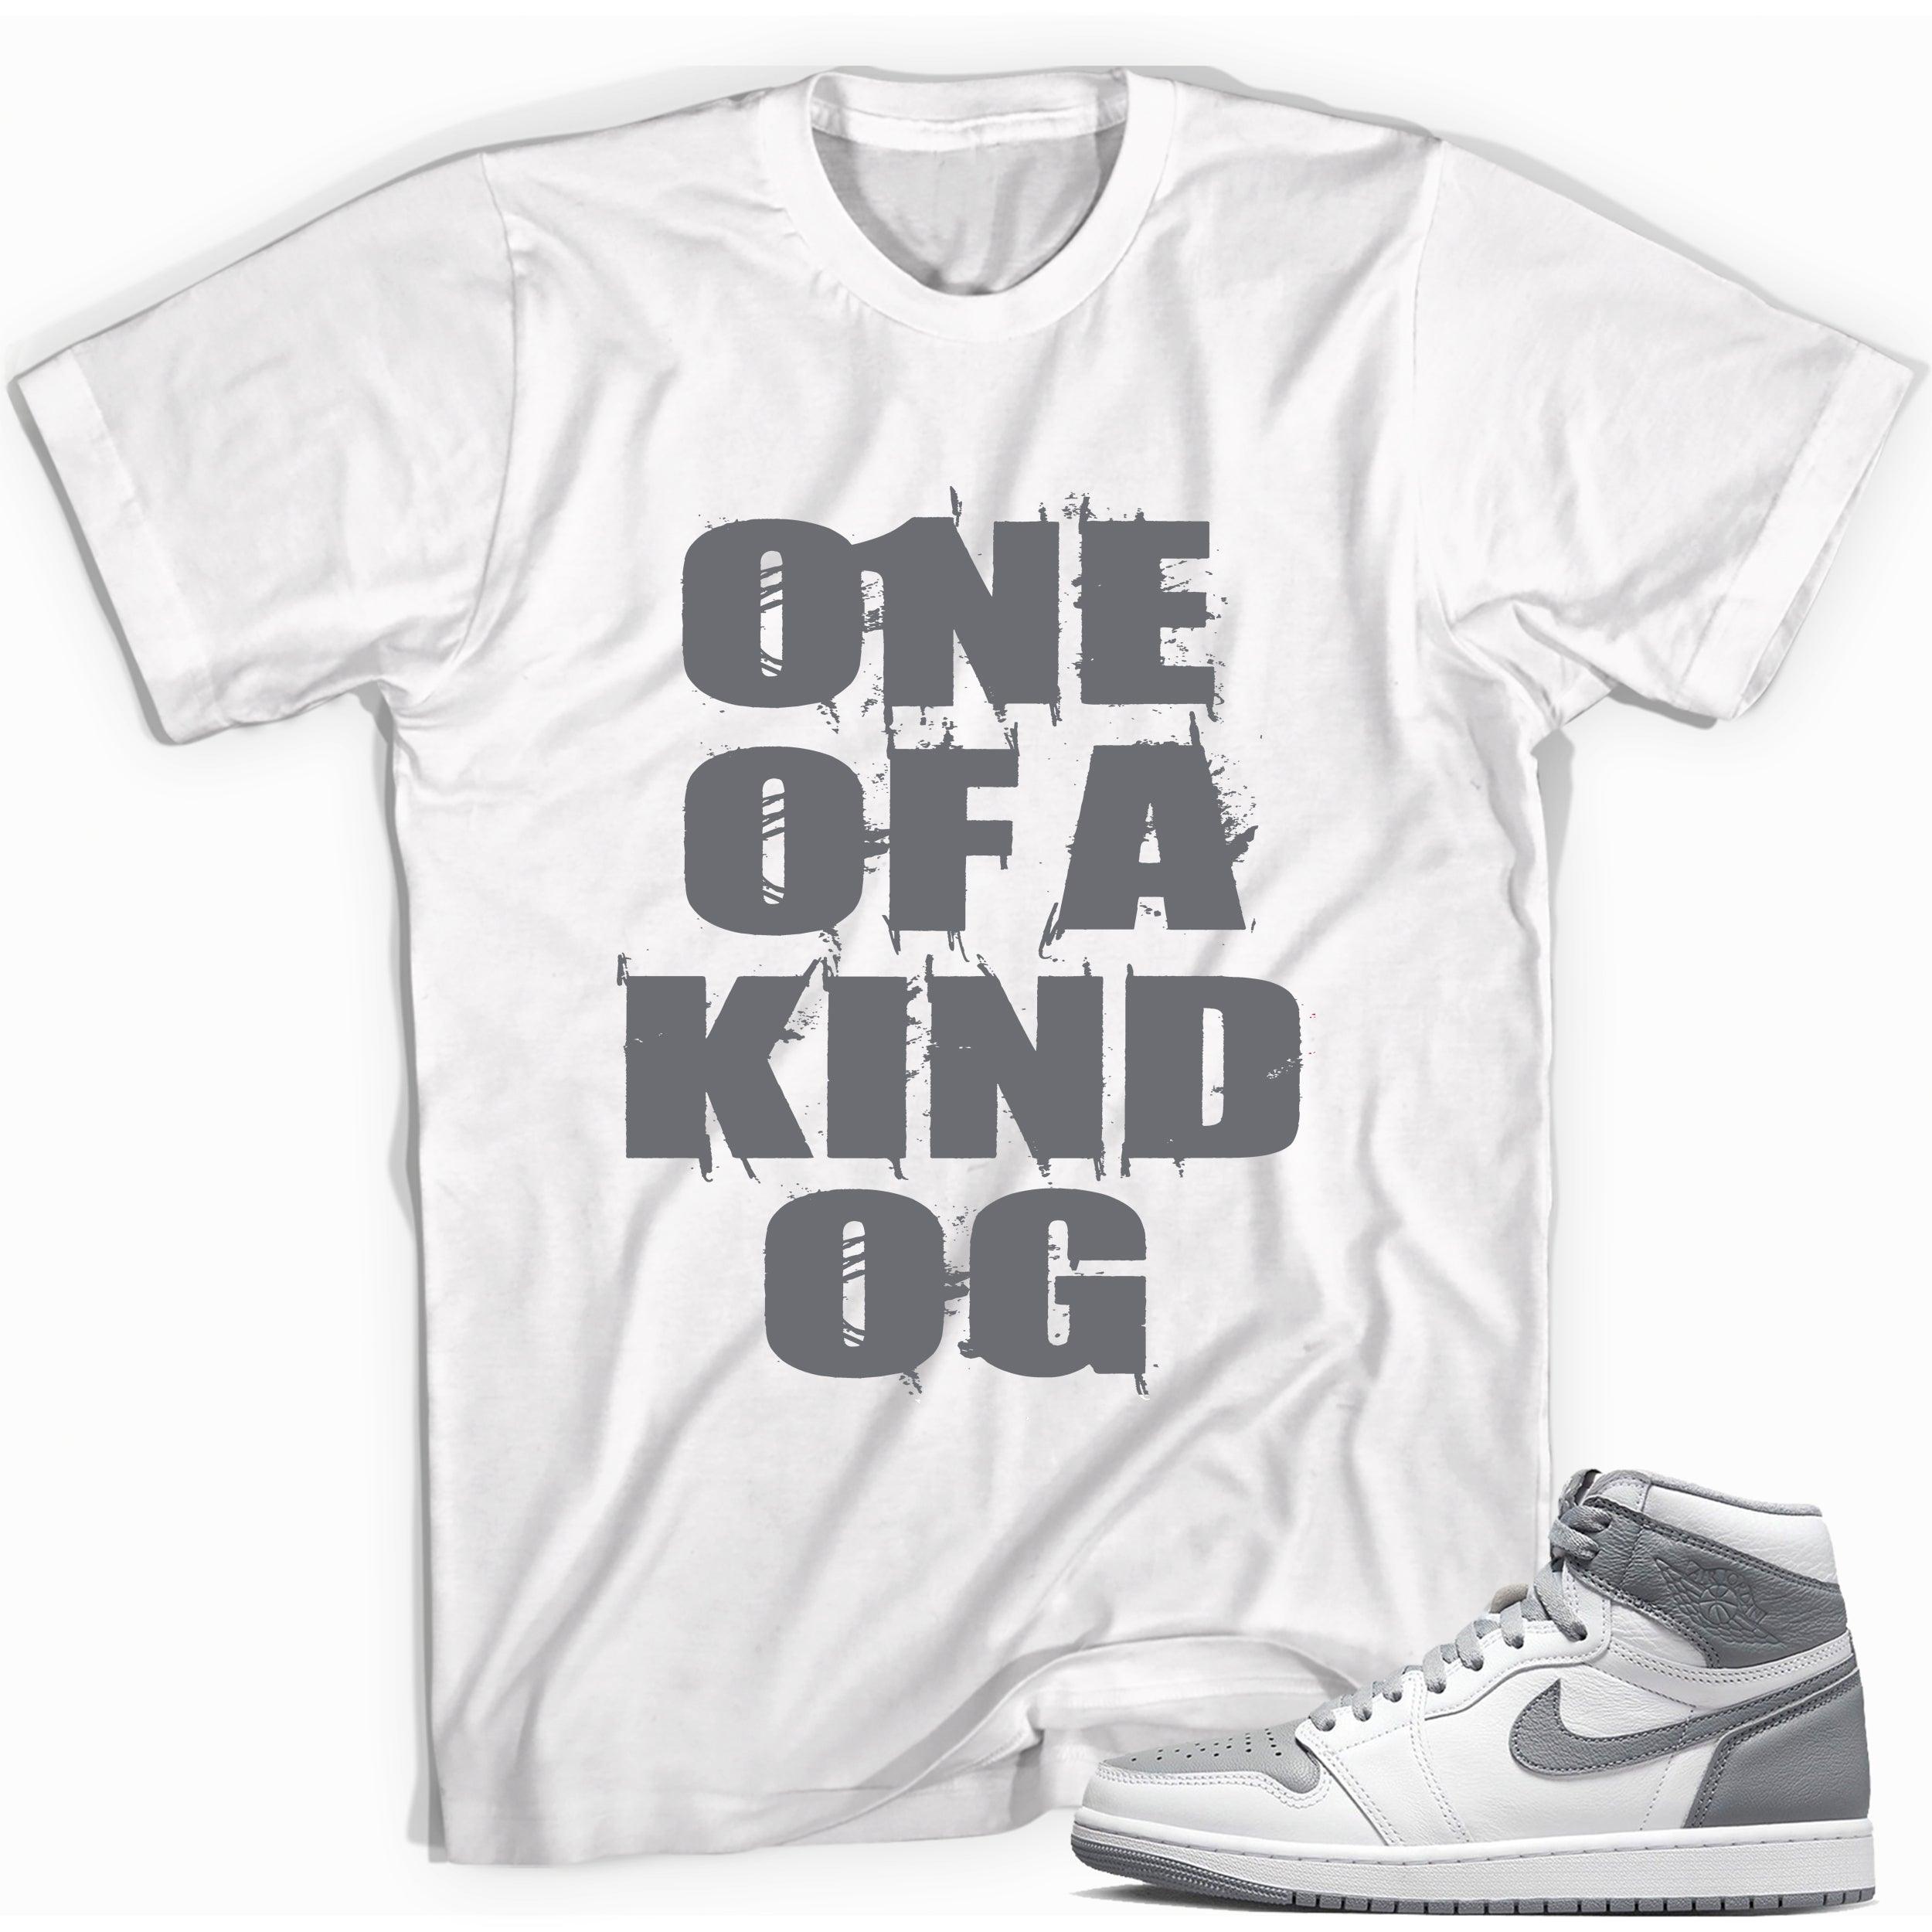 One of a Kind shirt for Jordan 1s photo